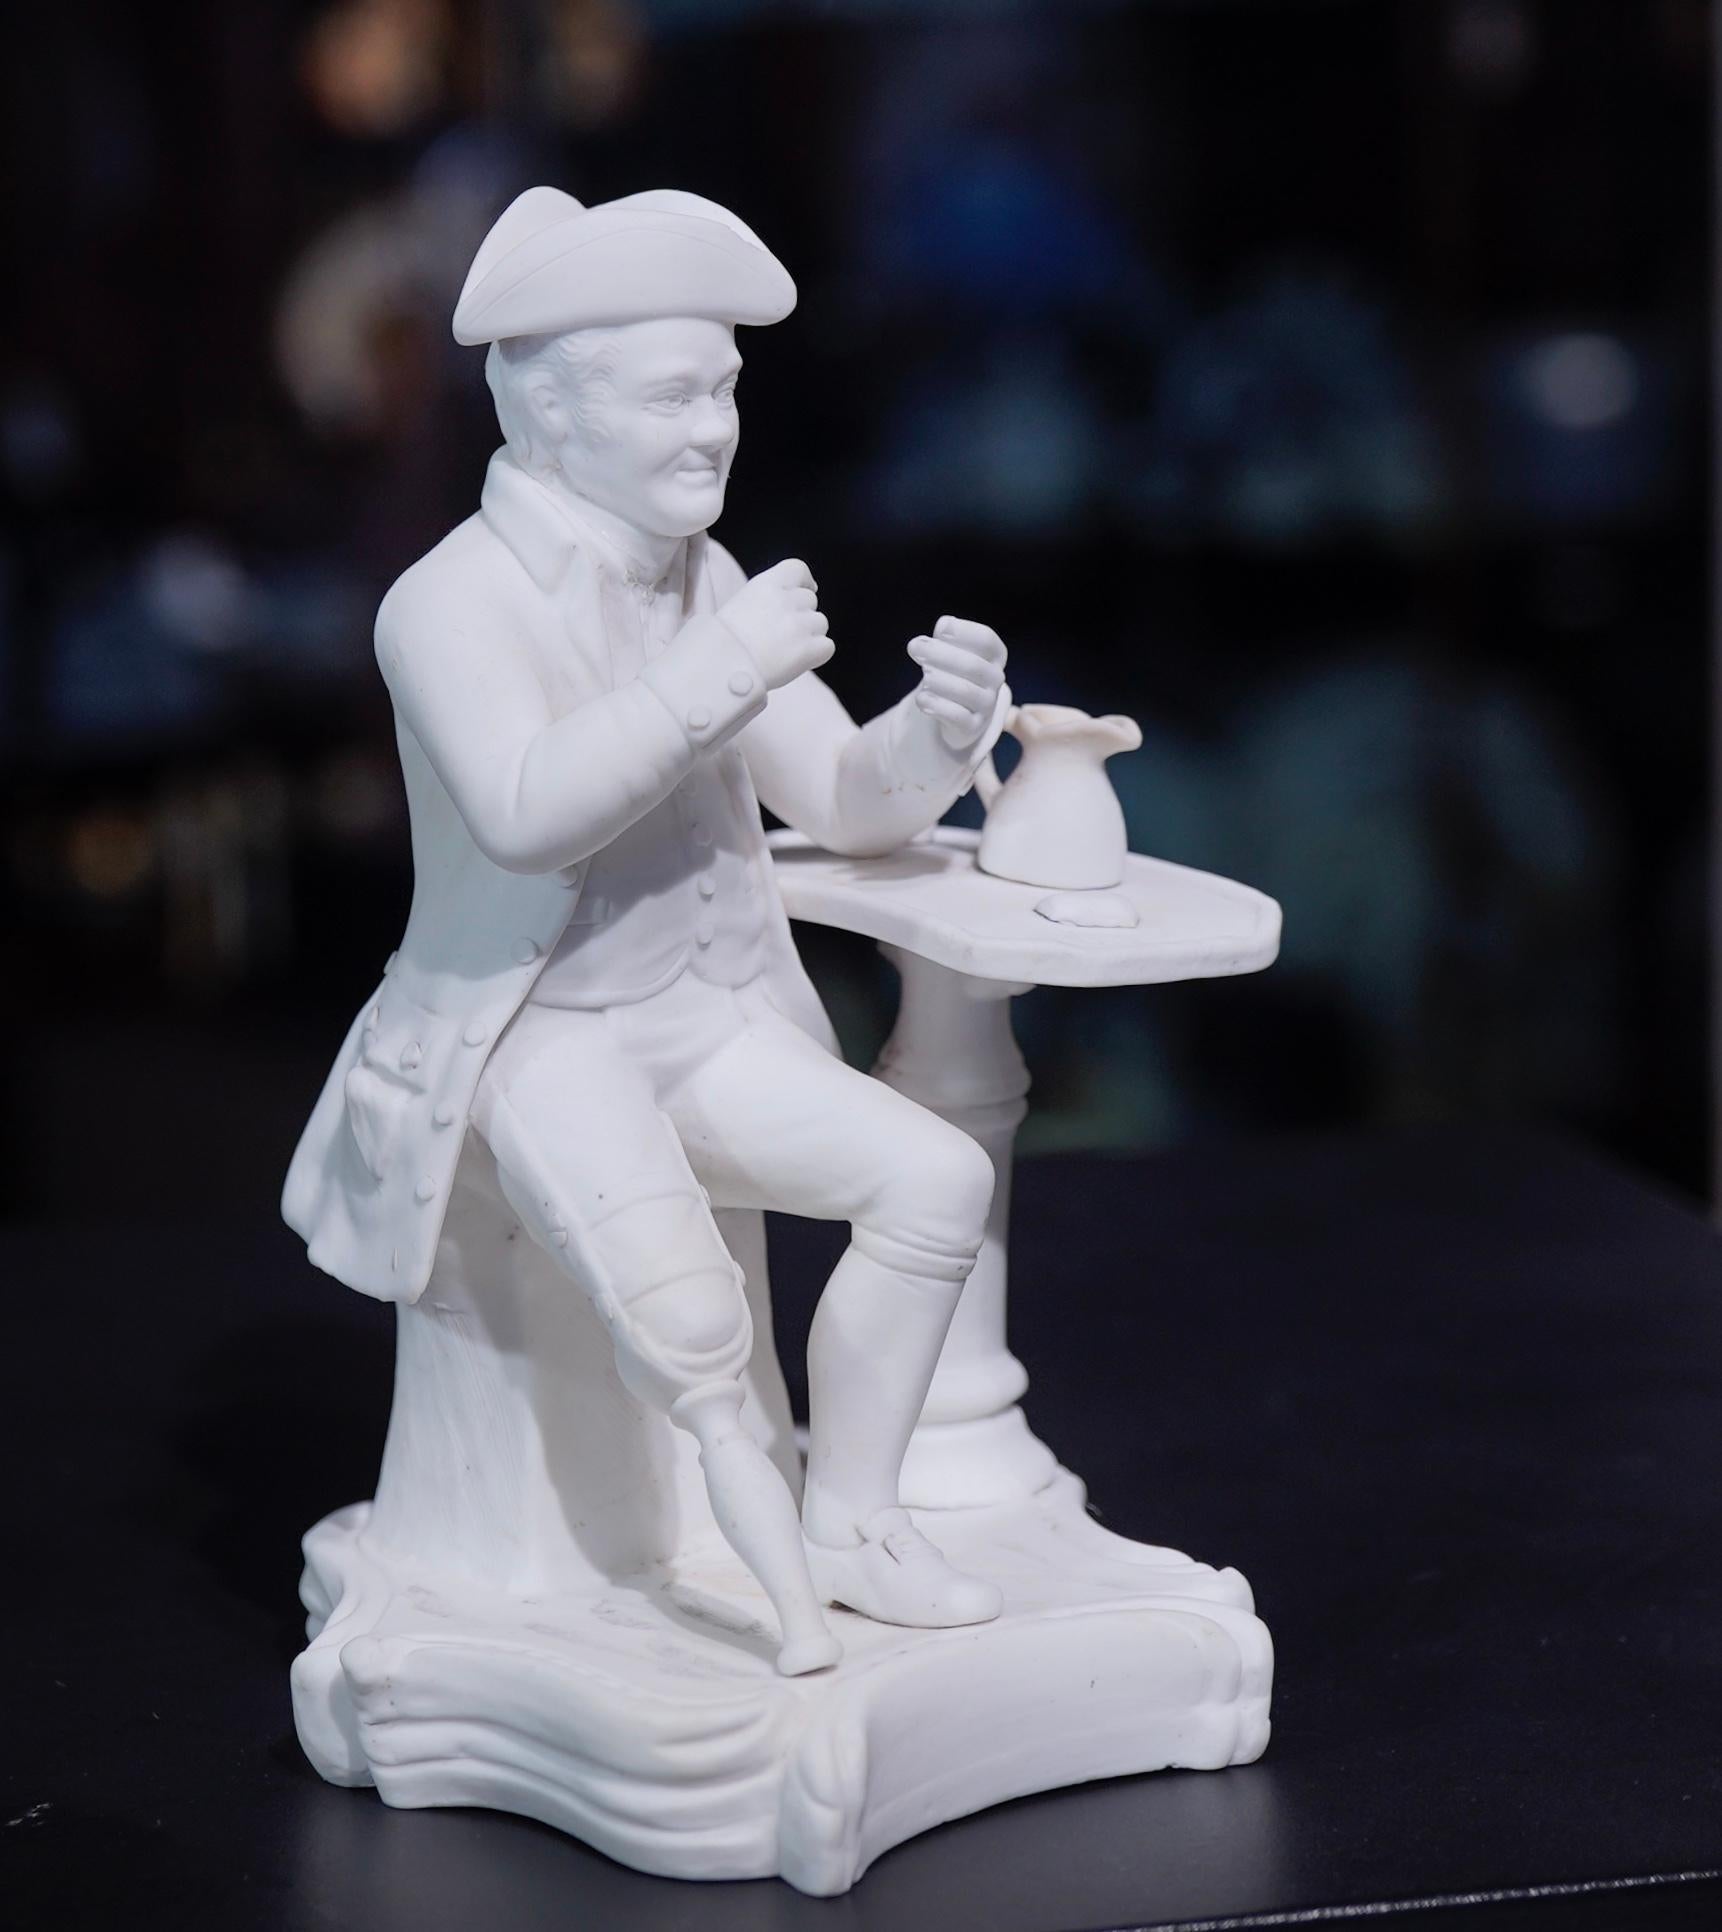 A Minton bisque figure of a “Greenwich pensioner”, modelled as a one legged veteran leaning on a table with a jug and glass, on a Rococo scroll base. Design No. 66 in the Minton pattern book.